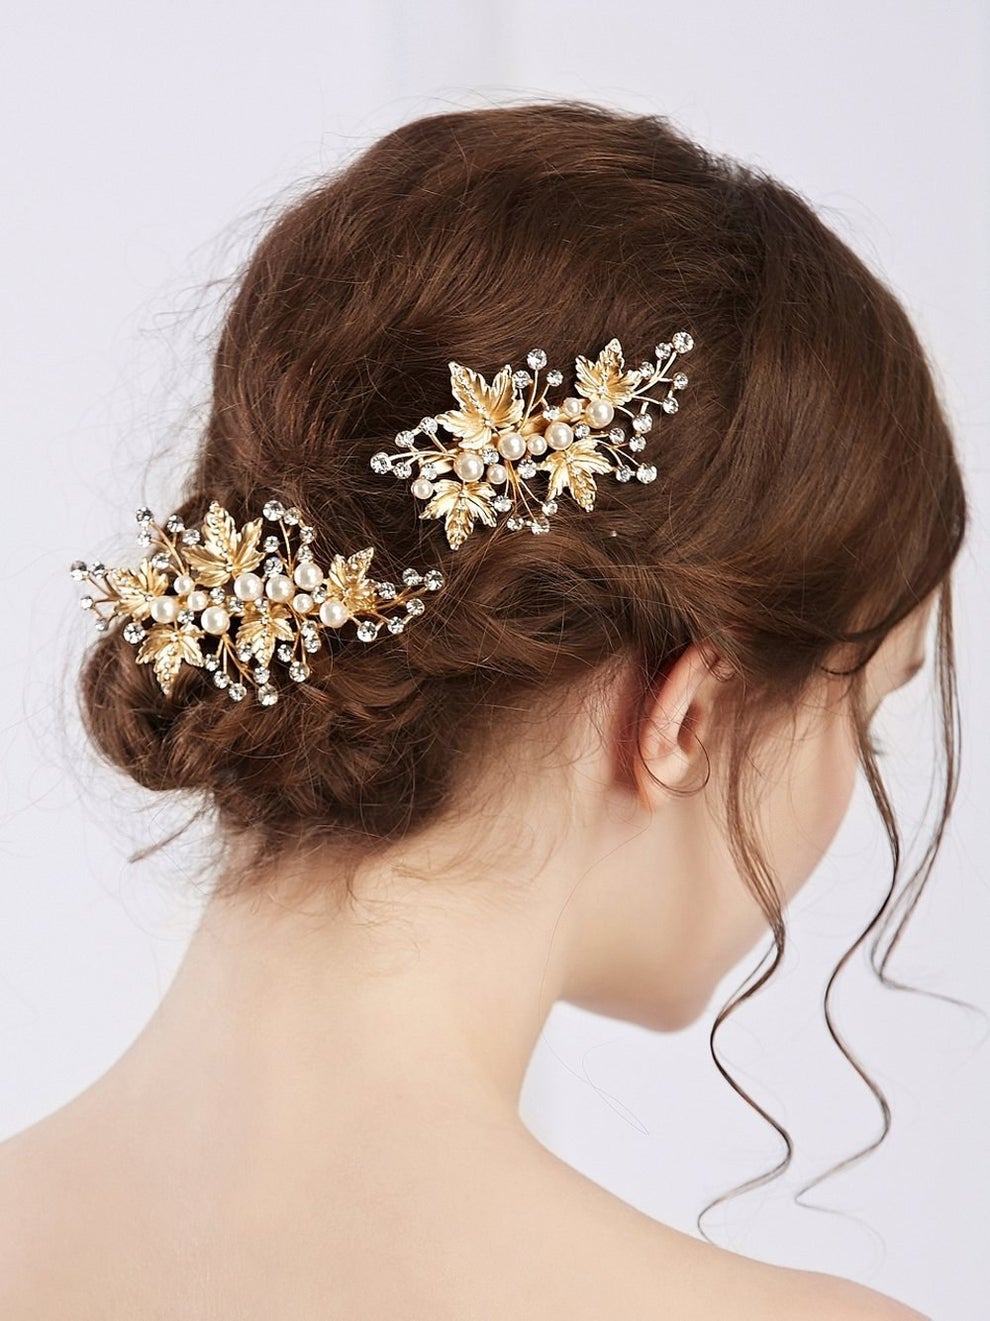 23 Hair Accessories That'll Distract From How Dirty Your Hair Is